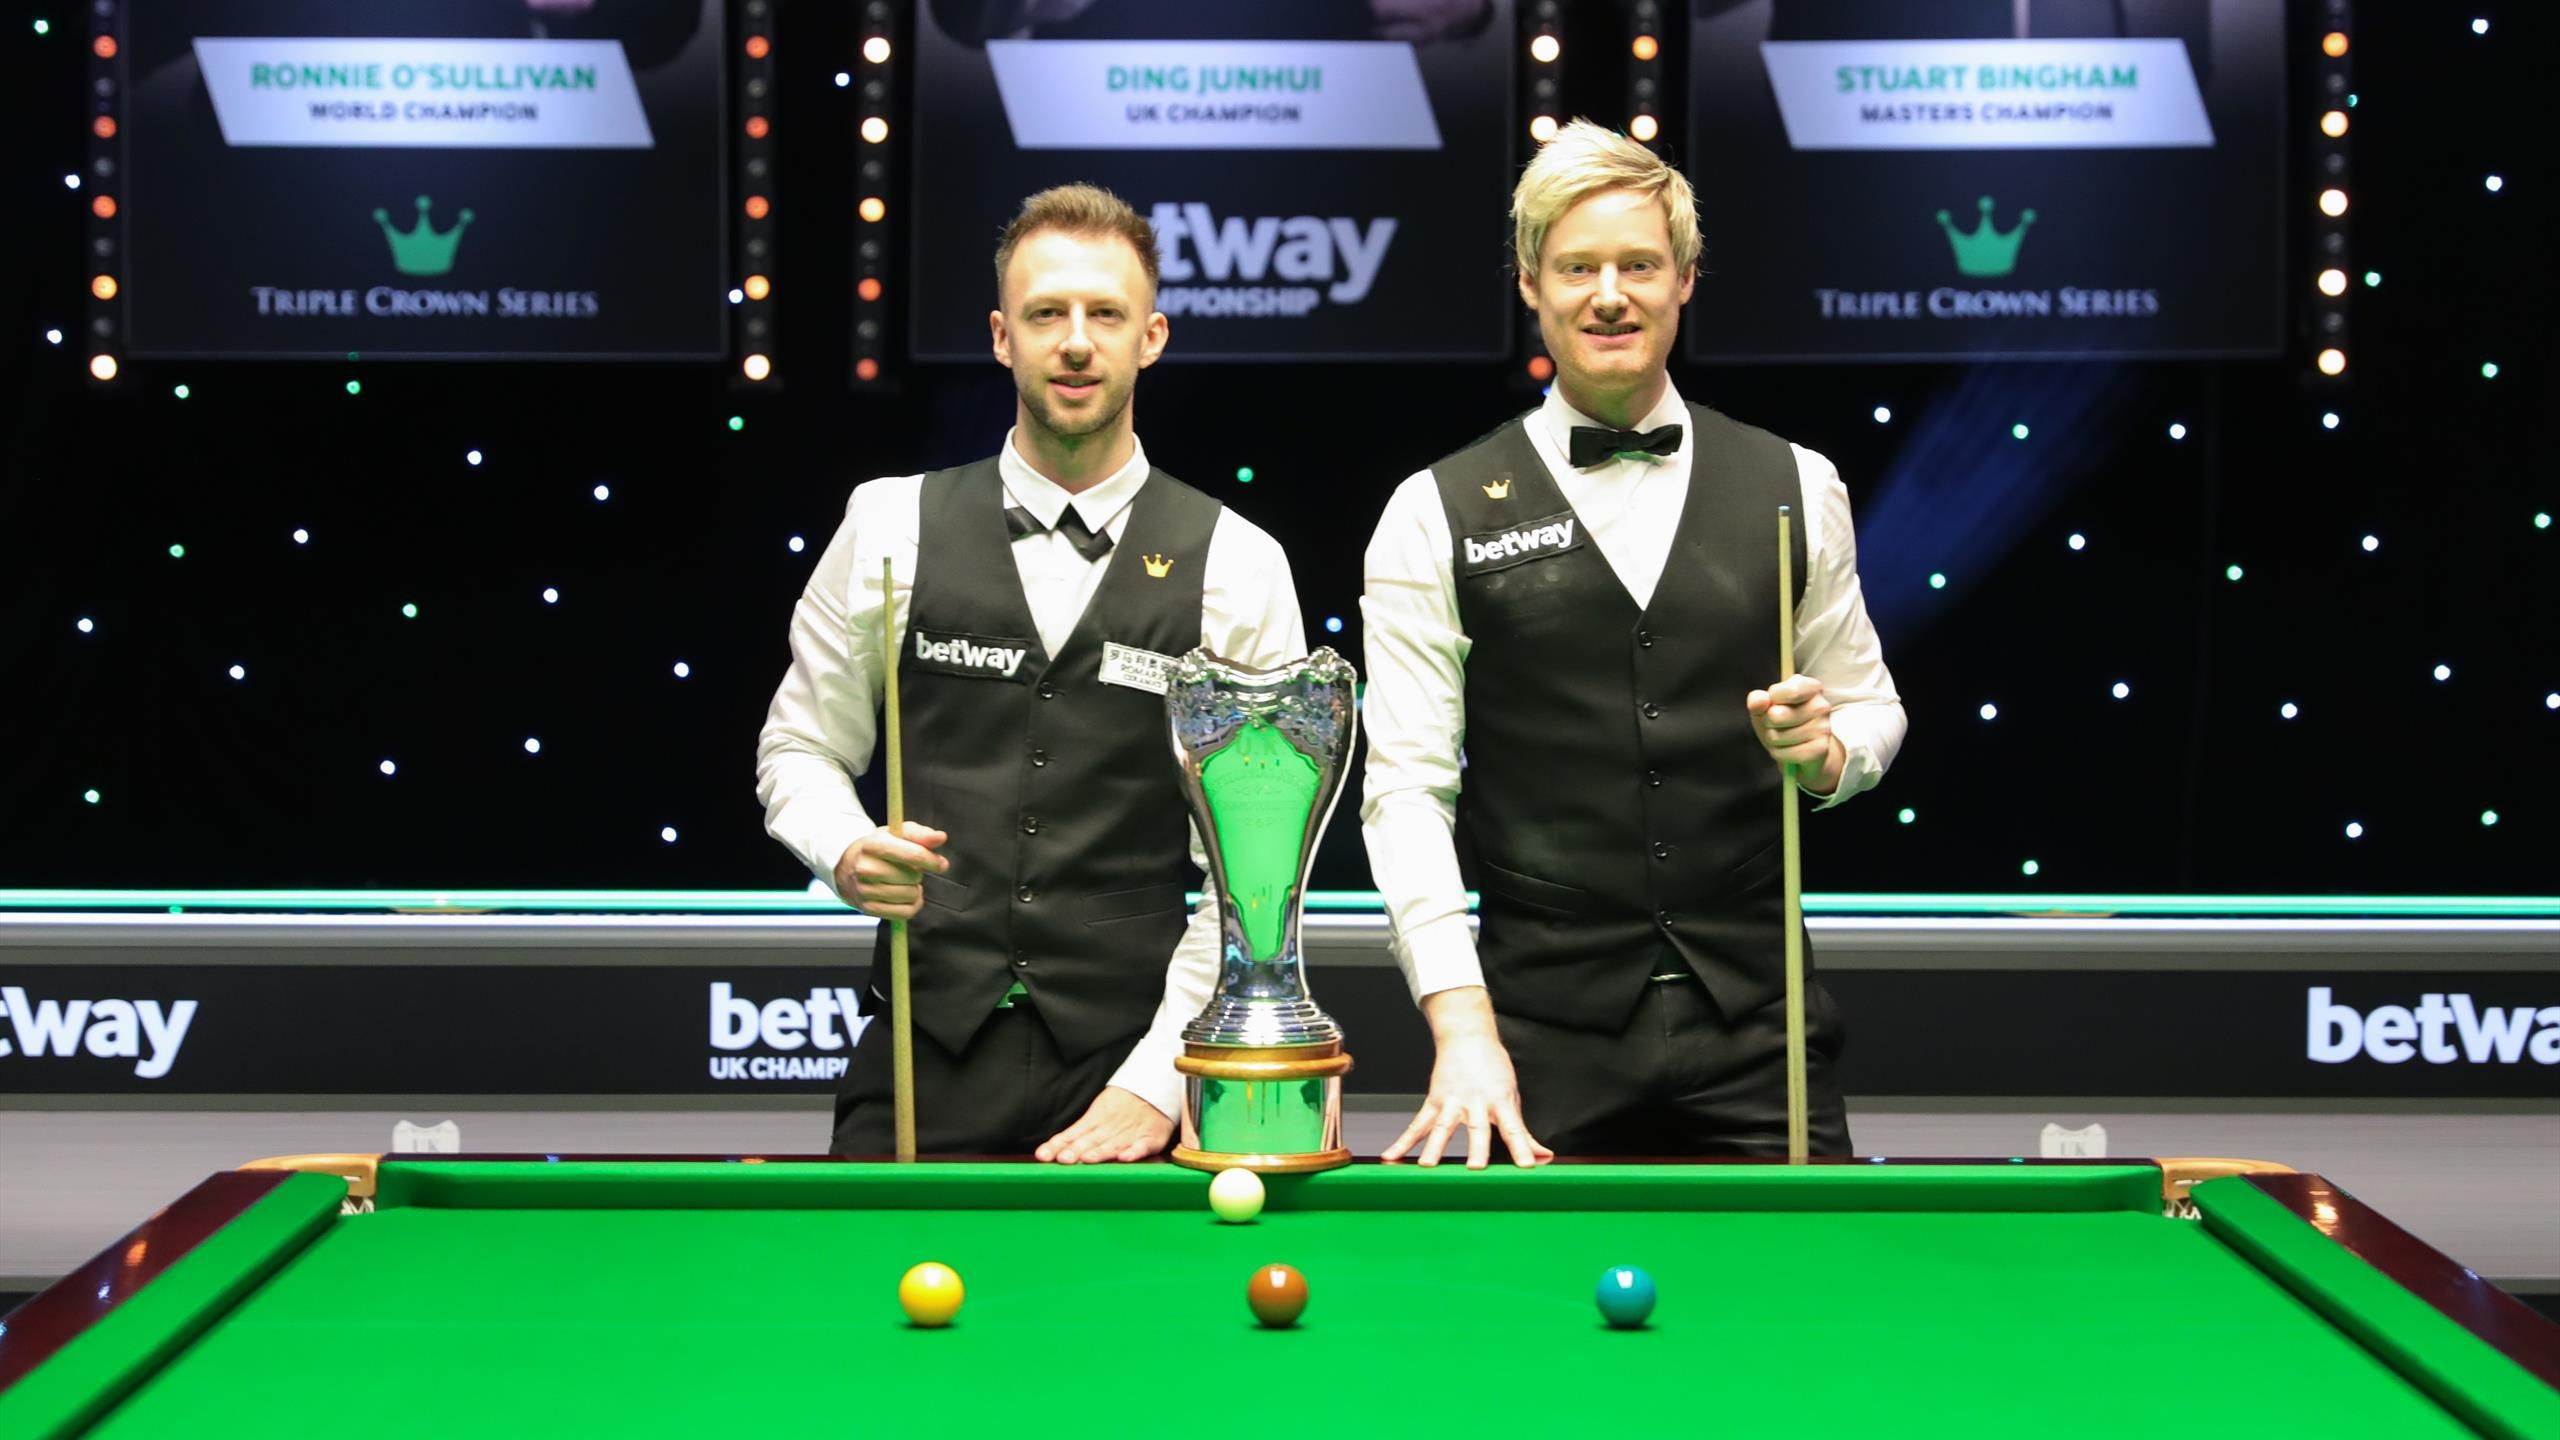 UK Championship snooker 2020 - Neil Robertson and Judd Trump neck and neck in dramatic final